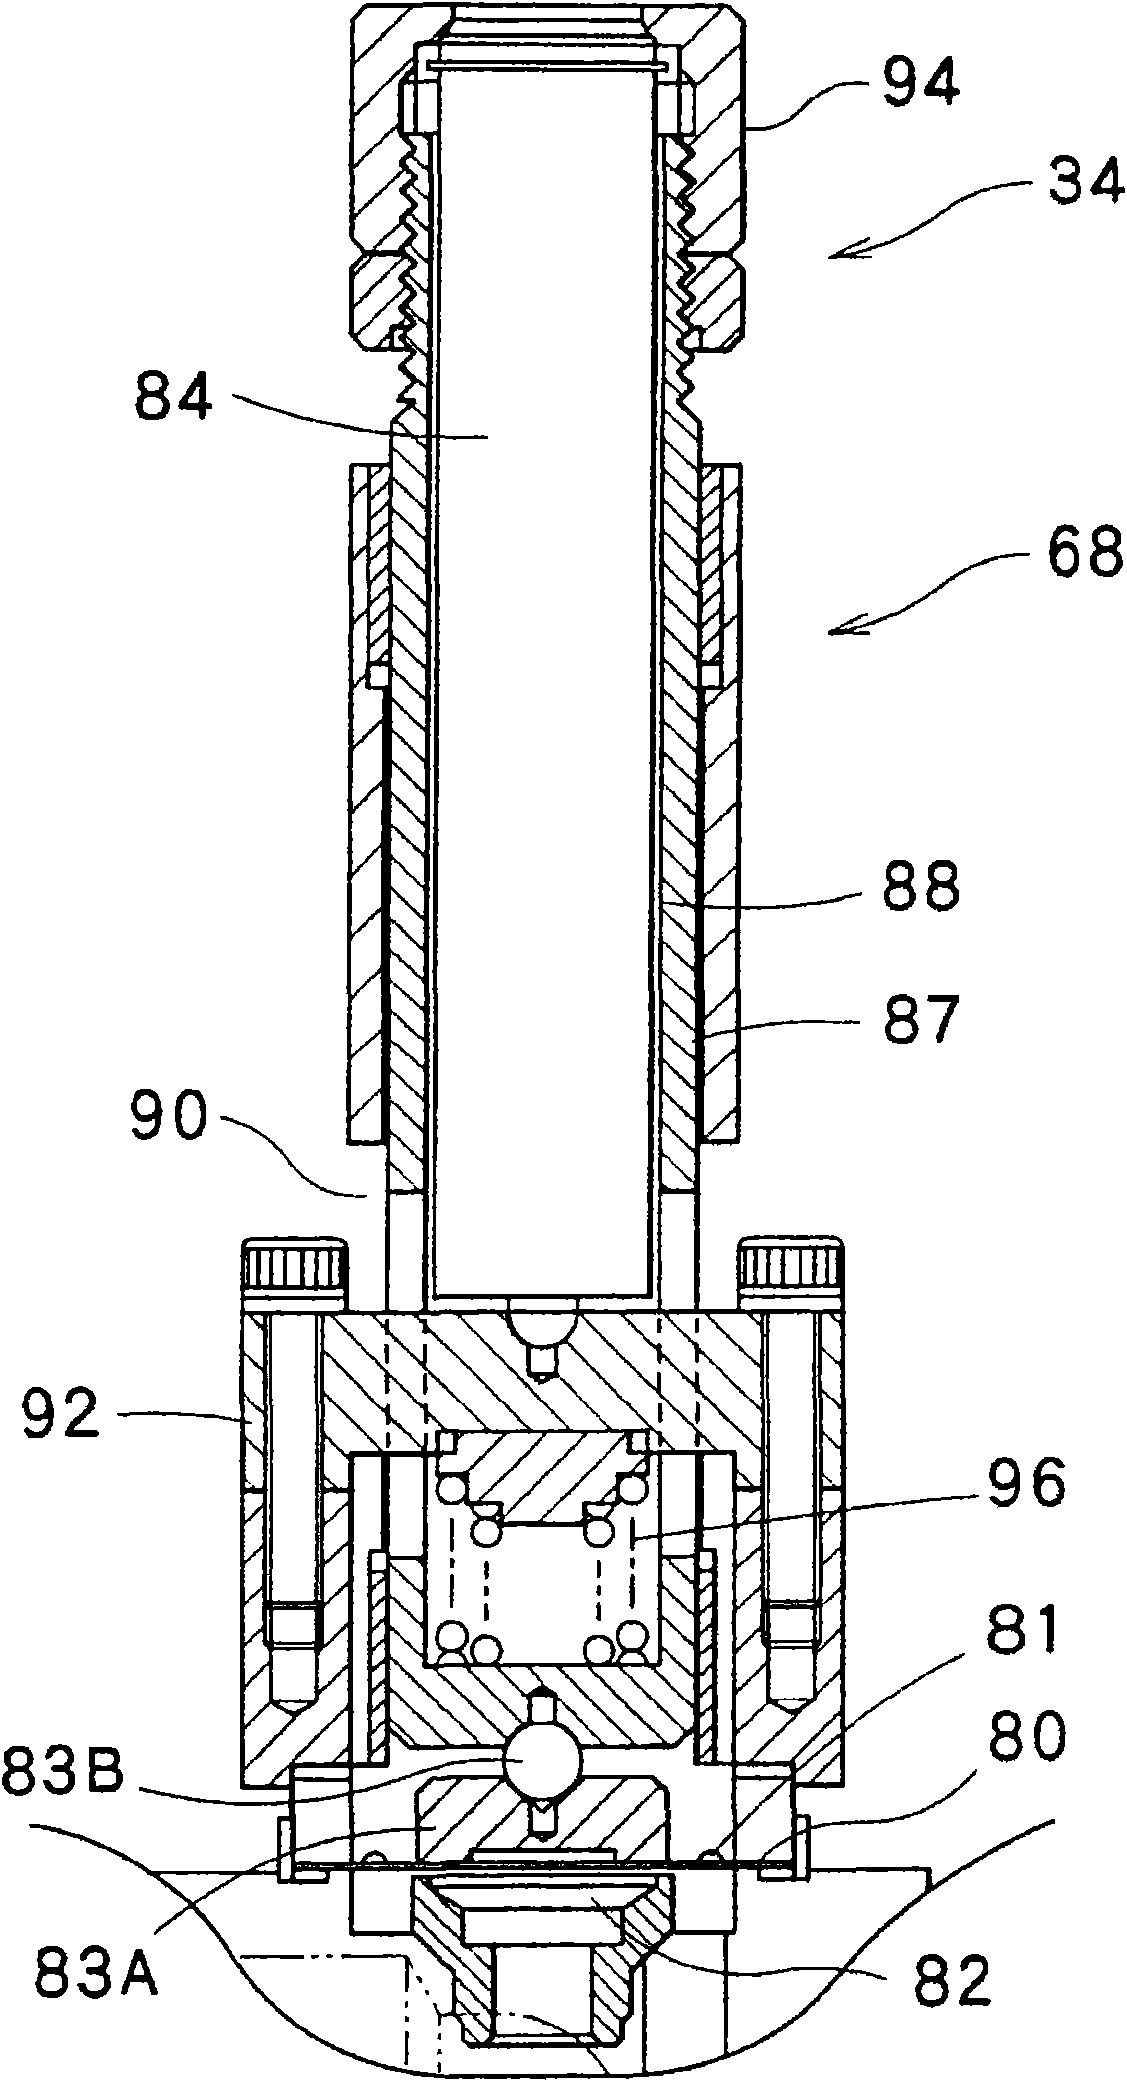 Method for supplying treatment gas, treatment gas supply system, and system for treating object